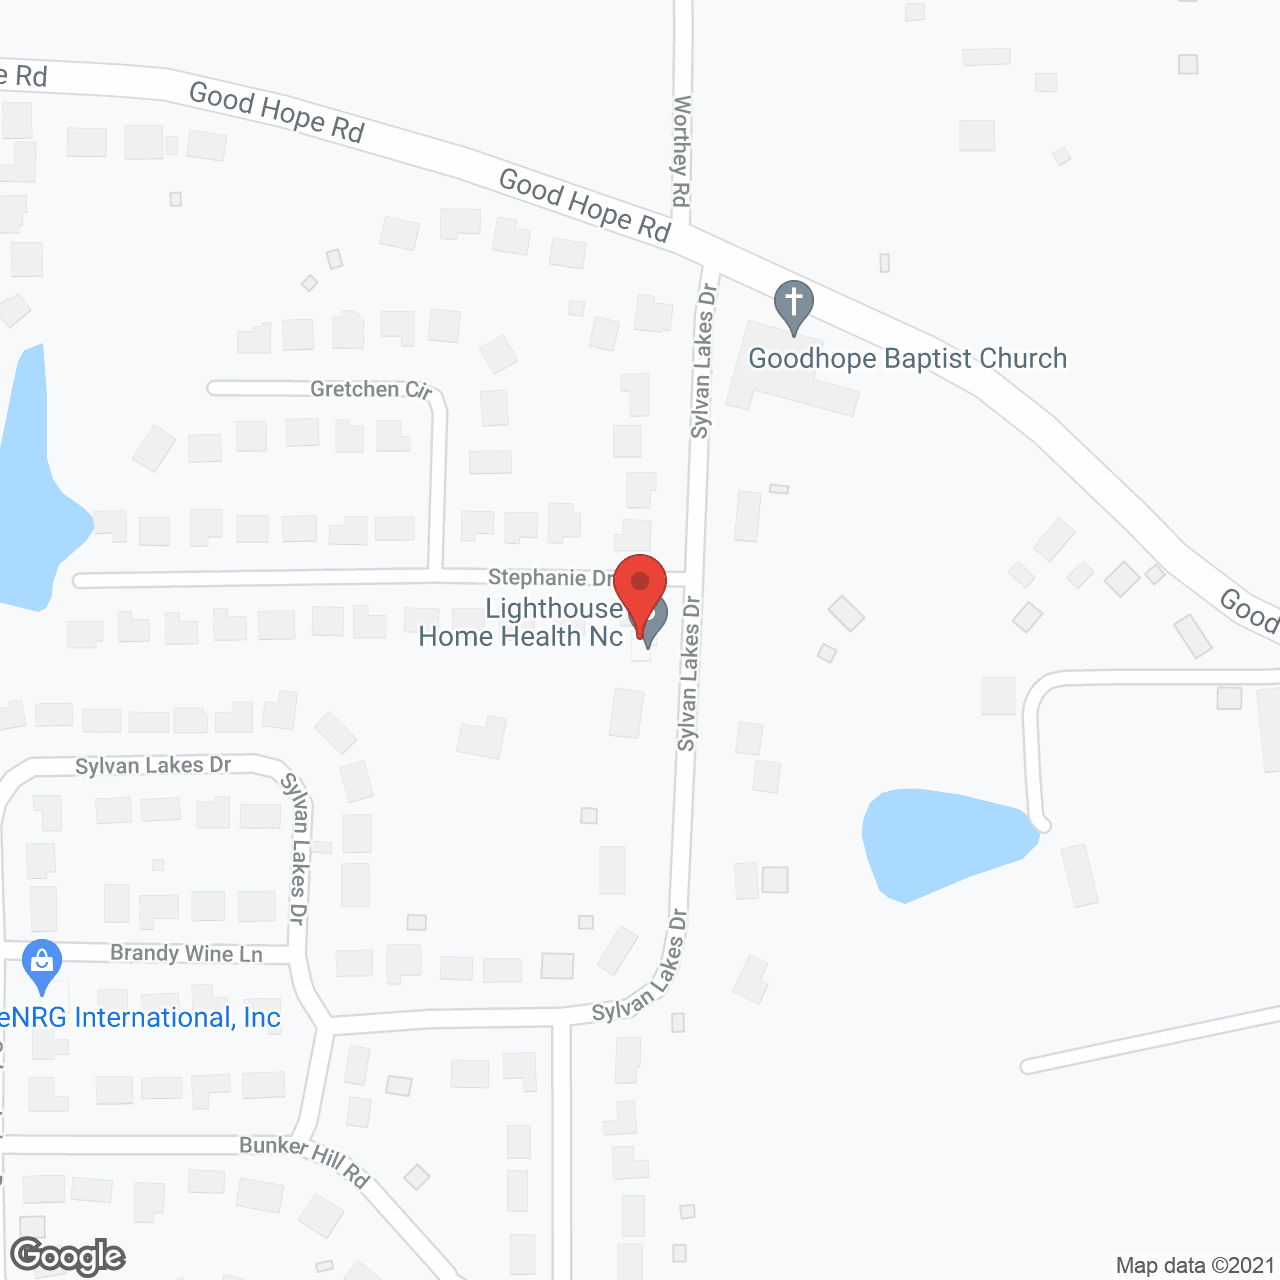 Lighthouse Home Health Nc in google map